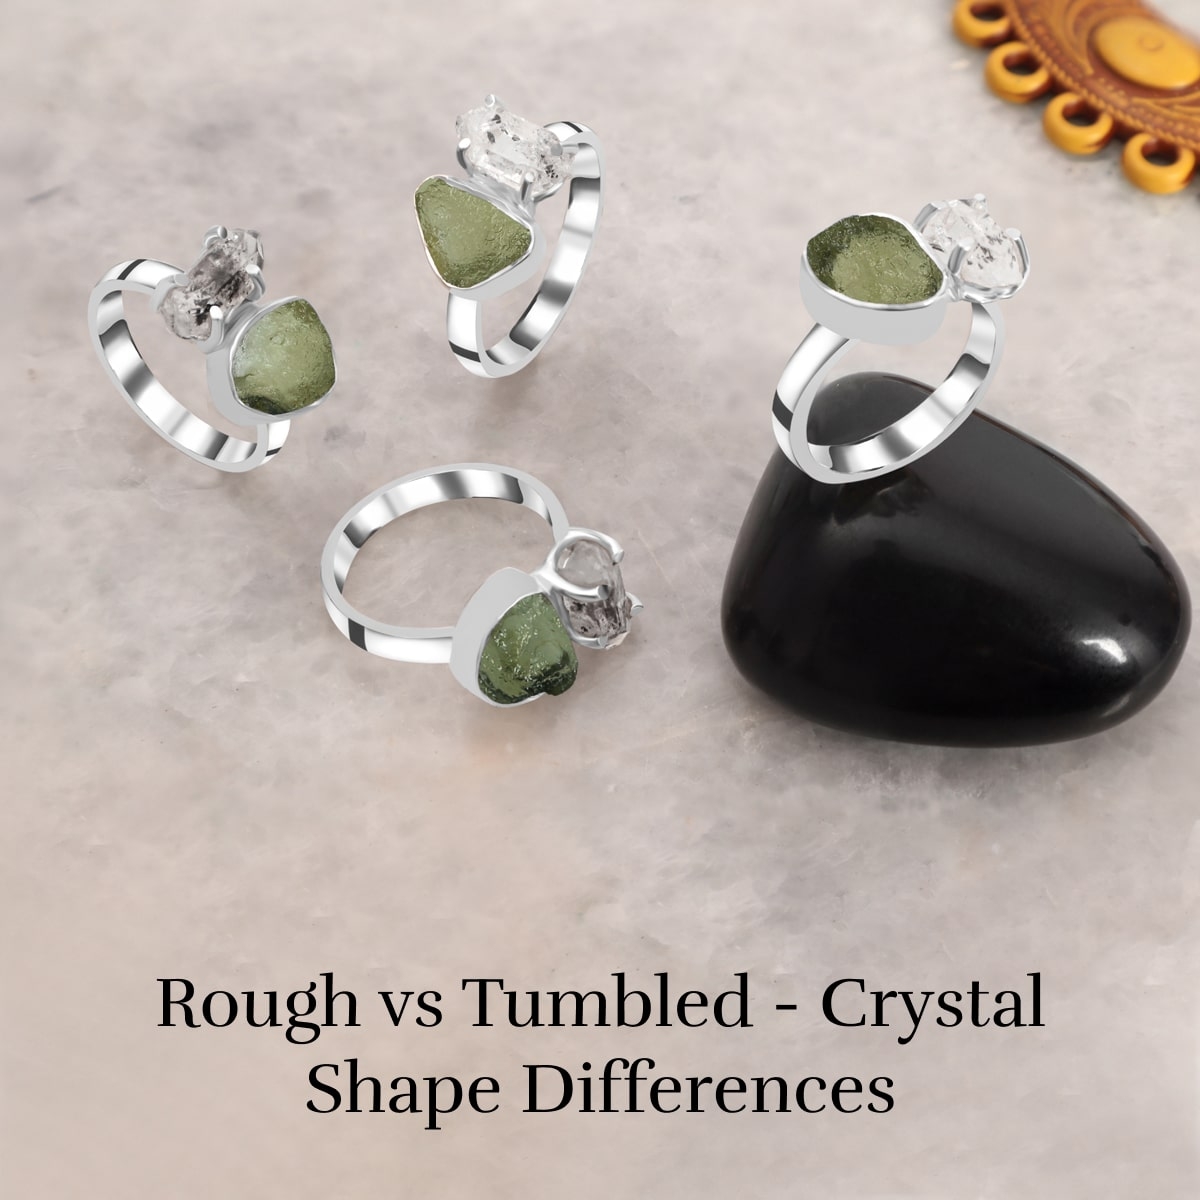 Differentiating Between Rough Crystal and Tumbled Crystal on the basis of Shape